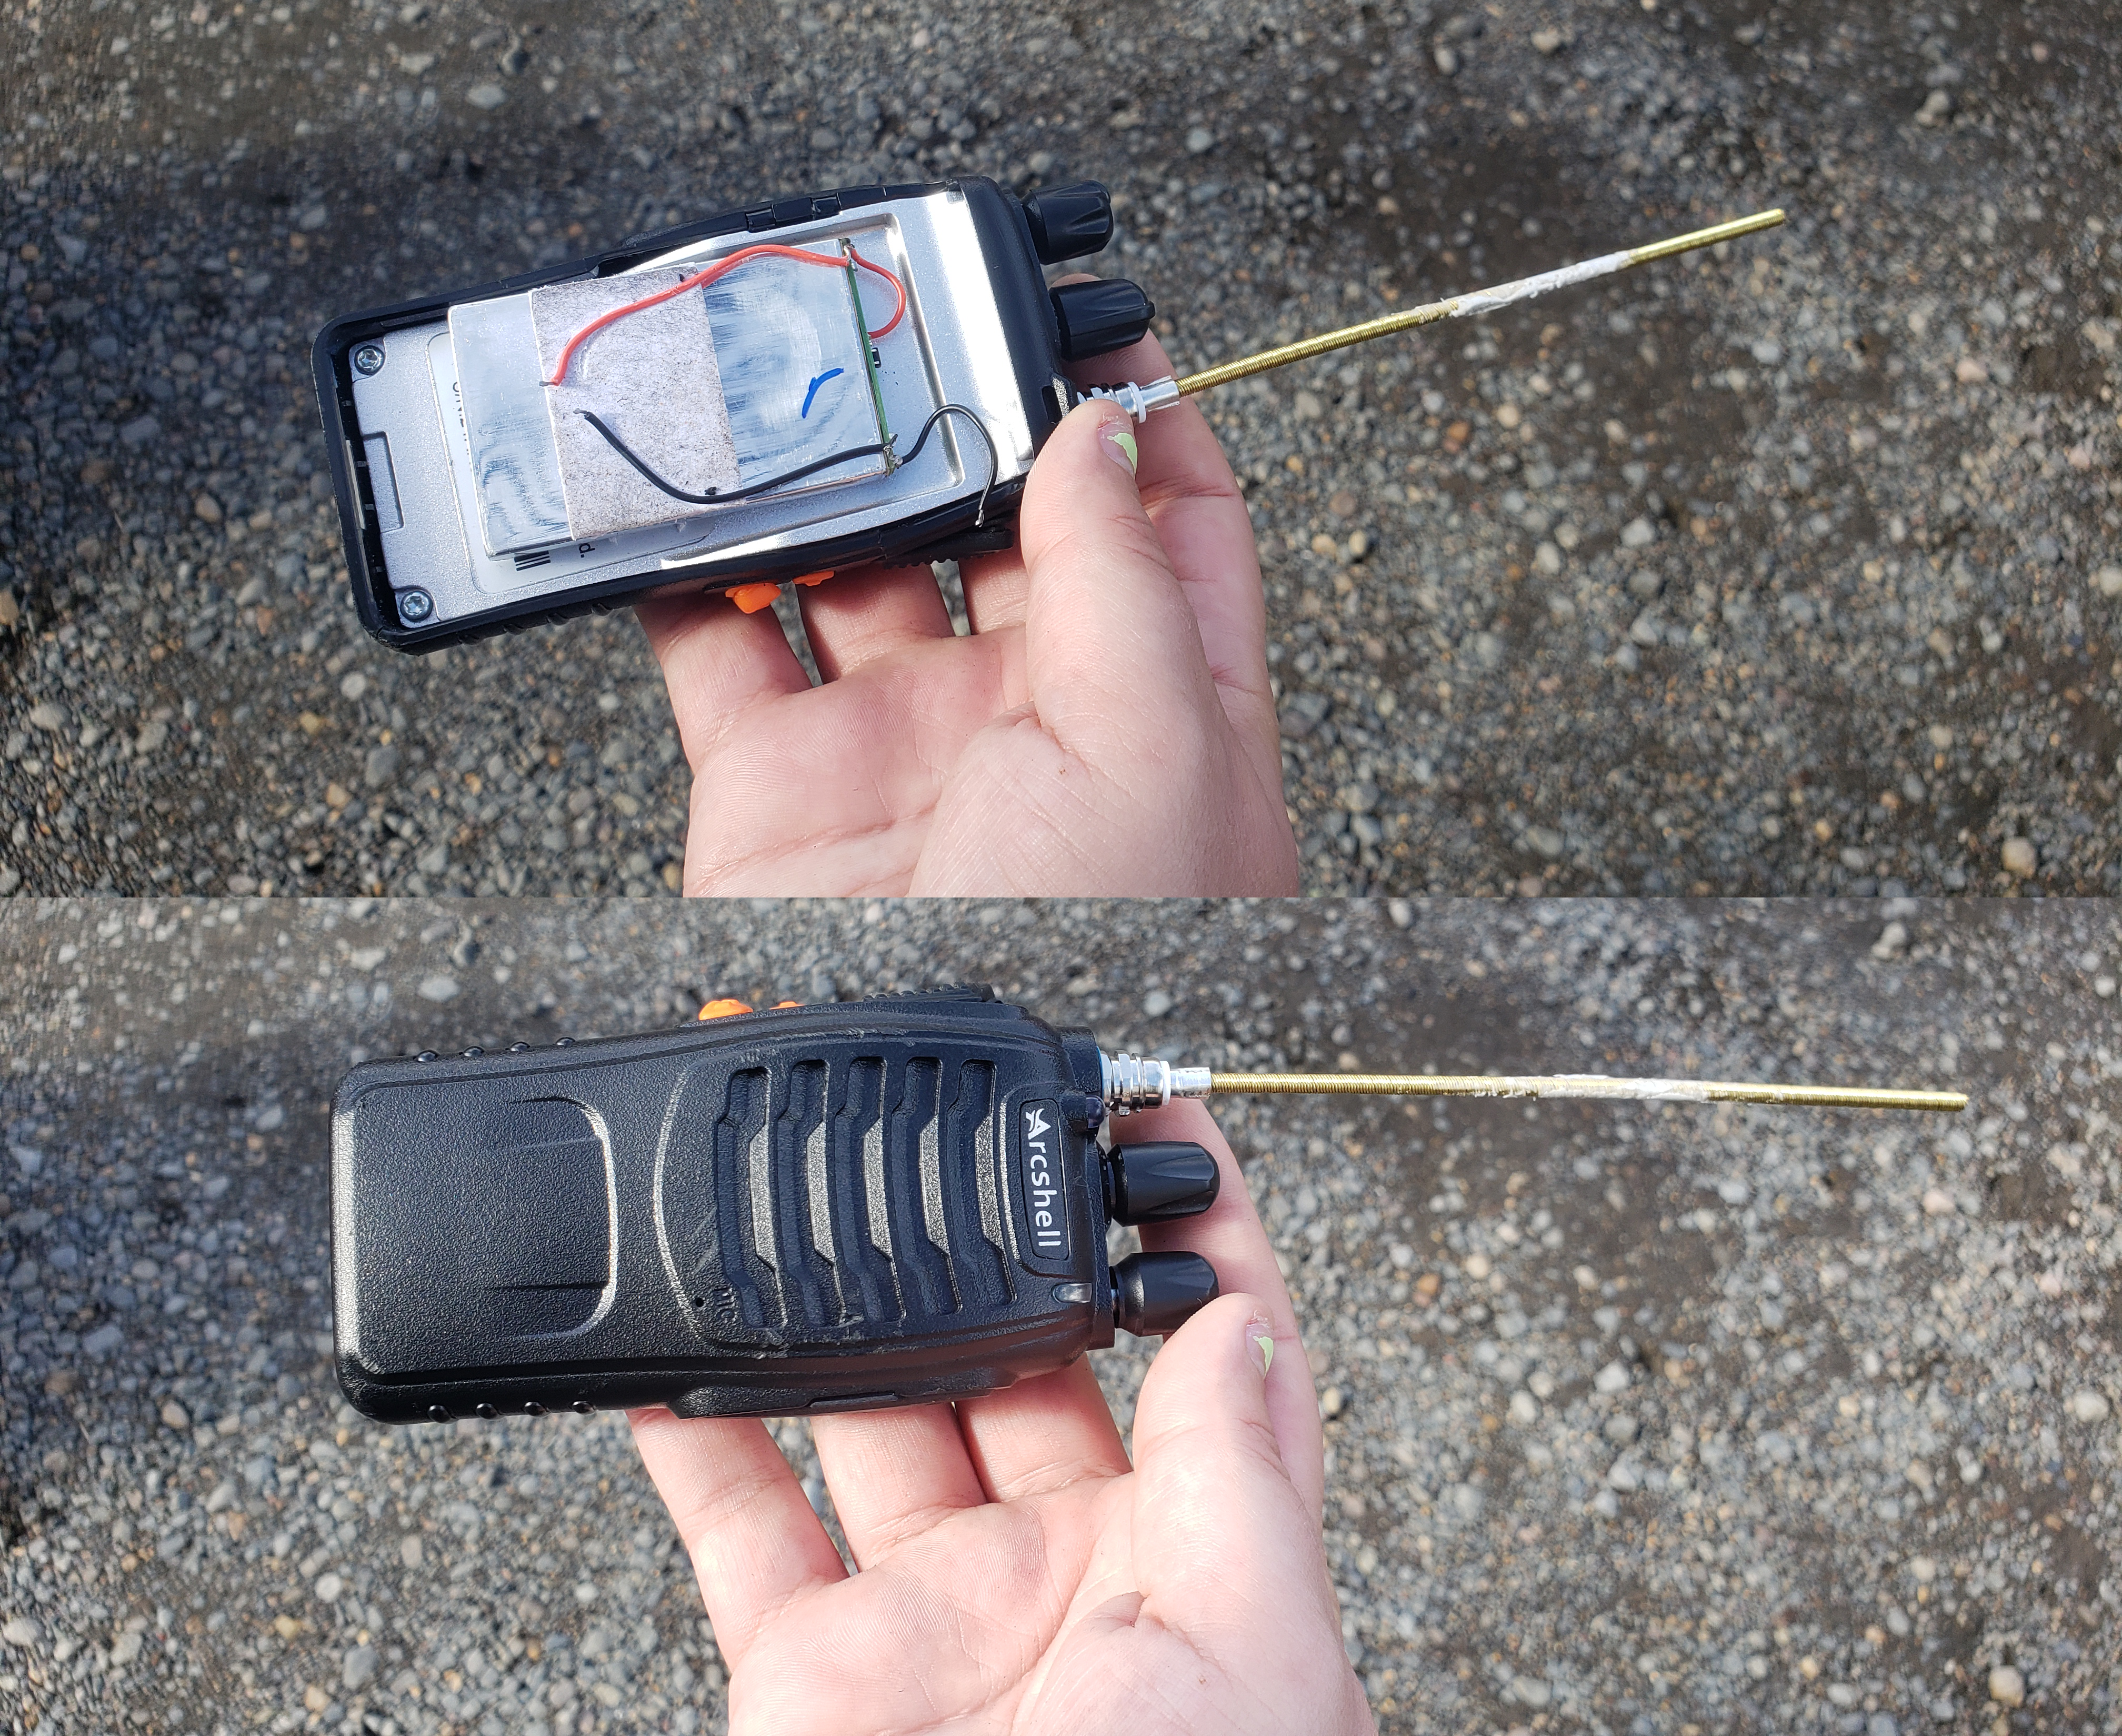 Bottom photo is A photograph of my hand holding a walkie talkie. The front has a black plastic case that says 'Arcshell' in white font. There's a long bronze antennae. Top photo is the back side and it's casing is missing. The inside is pretty plain silverish metal with three wires. One red, a short blue, and a black. The bronze antennae can be seen again.